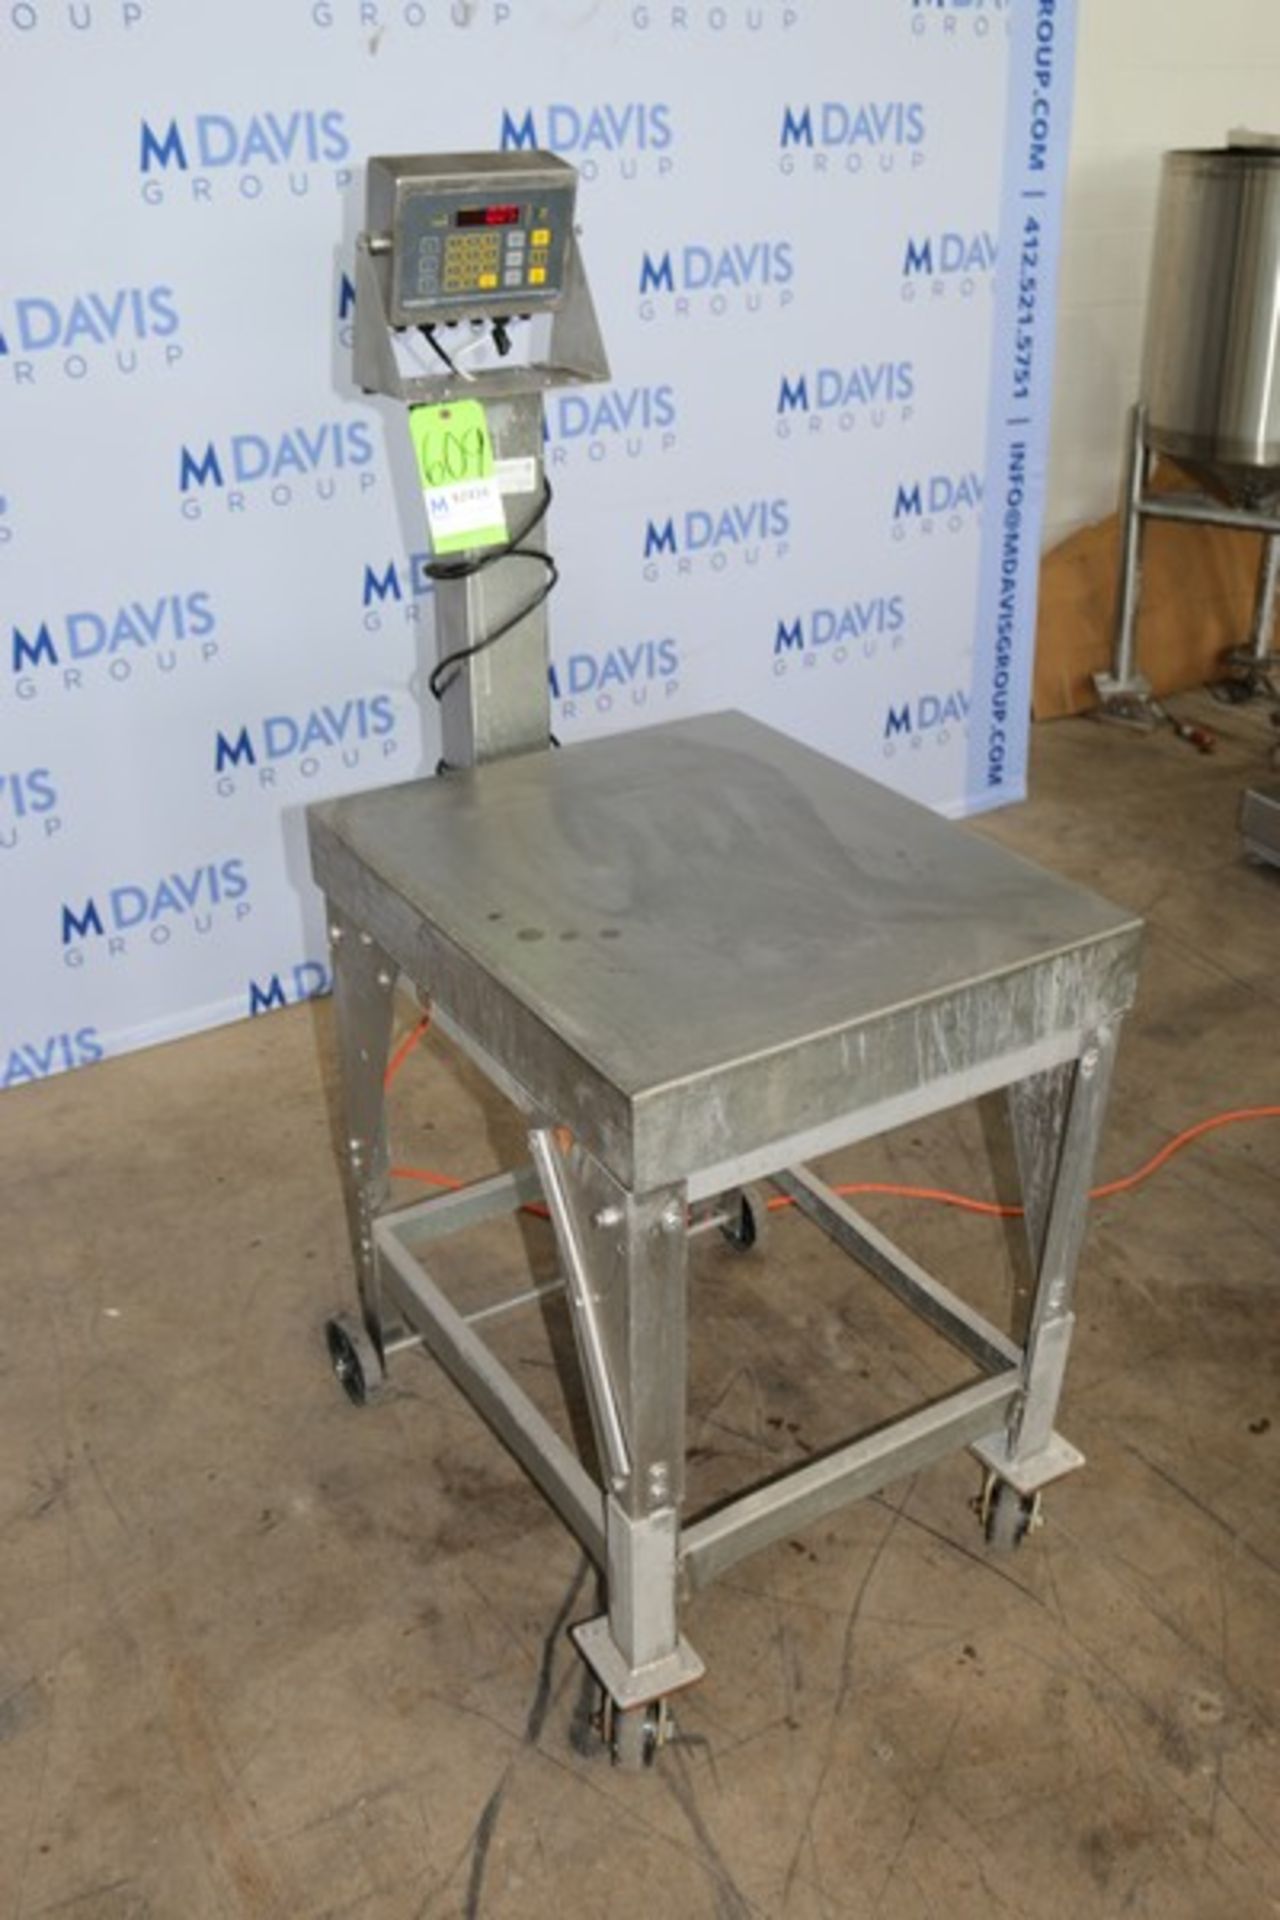 Fairbanks S/S Platform Scale,with Aprox. 28" L x 23" W S/S Platform, Mounted on S/S Portable